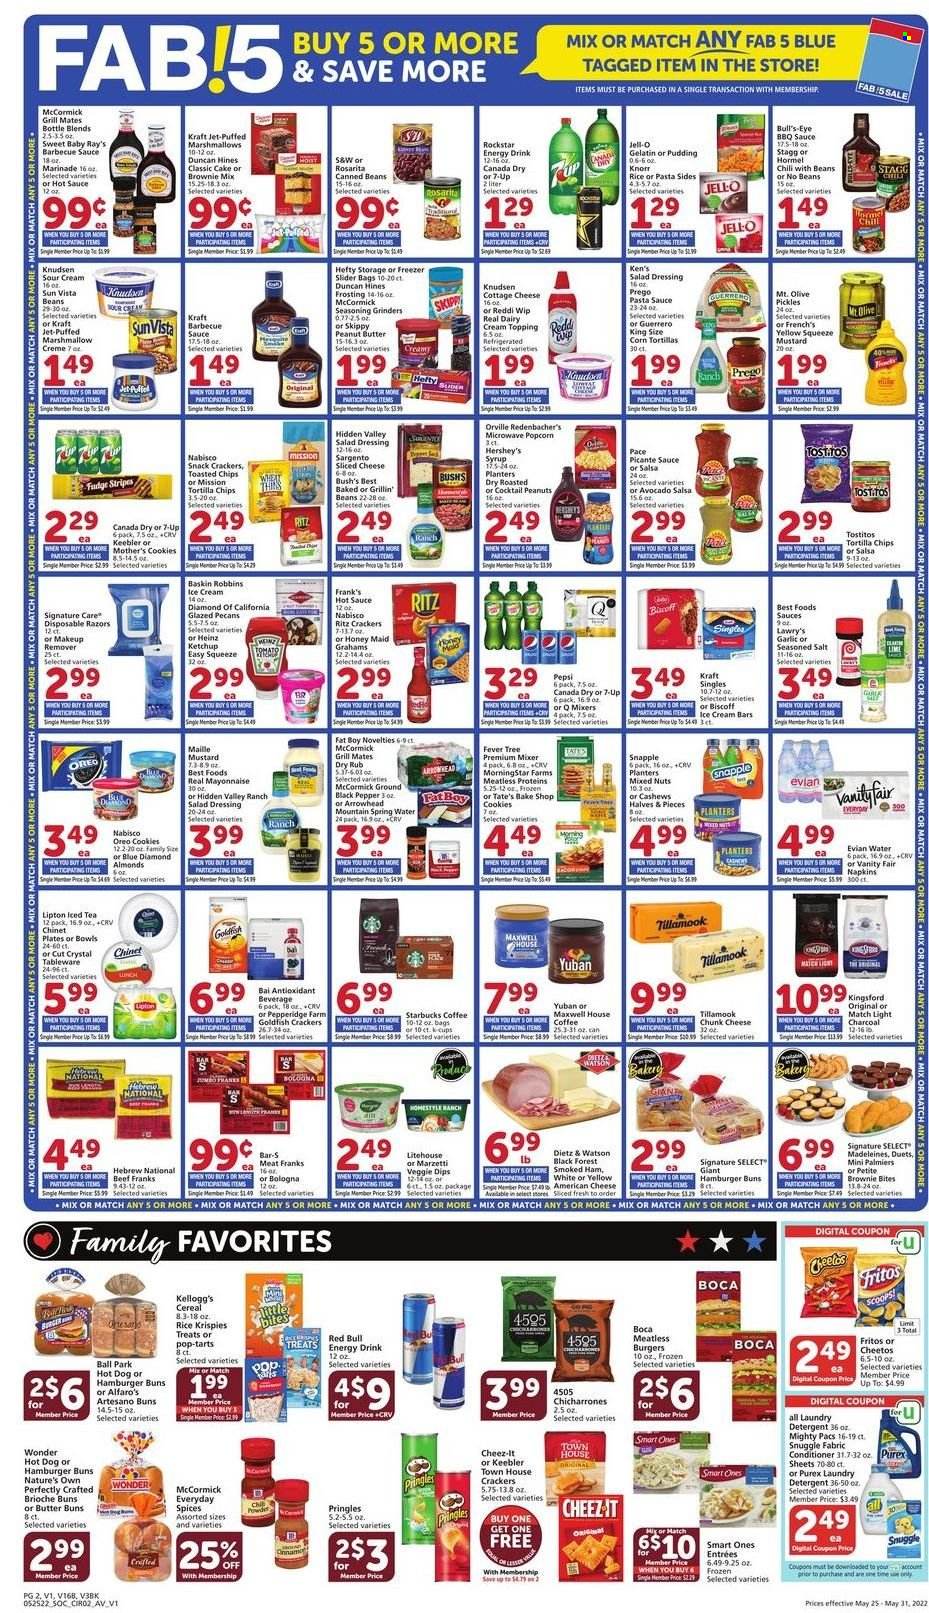 thumbnail - Albertsons Flyer - 05/25/2022 - 05/31/2022 - Sales products - corn tortillas, cake, buns, burger buns, brioche, brownies, garlic, hot dog, pasta sauce, pasta sides, Kraft®, Hormel, ham, smoked ham, bologna sausage, Dietz & Watson, american cheese, cottage cheese, sandwich slices, sliced cheese, Kraft Singles, chunk cheese, Sargento, pudding, Oreo, sour cream, real dairy cream, mayonnaise, ice cream, ice cream bars, Hershey's, cookies, fudge, marshmallows, snack, Mars, crackers, Kellogg's, Pop-Tarts, Little Bites, Keebler, RITZ, Fritos, tortilla chips, Pringles, Cheetos, popcorn, Goldfish, Cheez-It, Tostitos, frosting, topping, Jell-O, Heinz, pickles, cereals, Honey Maid, rice, spice, BBQ sauce, mustard, salad dressing, hot sauce, ketchup, dressing, salsa, marinade, peanut butter, syrup, almonds, cashews, peanuts, pecans, mixed nuts, Planters, Blue Diamond, Canada Dry, Pepsi, energy drink, Lipton, ice tea, 7UP, Red Bull, Snapple, Bai, Rockstar, spring water, Evian, Maxwell House, coffee, Starbucks, coffee capsules, K-Cups, napkins, detergent, Snuggle, laundry detergent, Purex, Jet, disposable razor, Hefty, makeup remover, tableware, plate, cup, Nature's Own. Page 2.